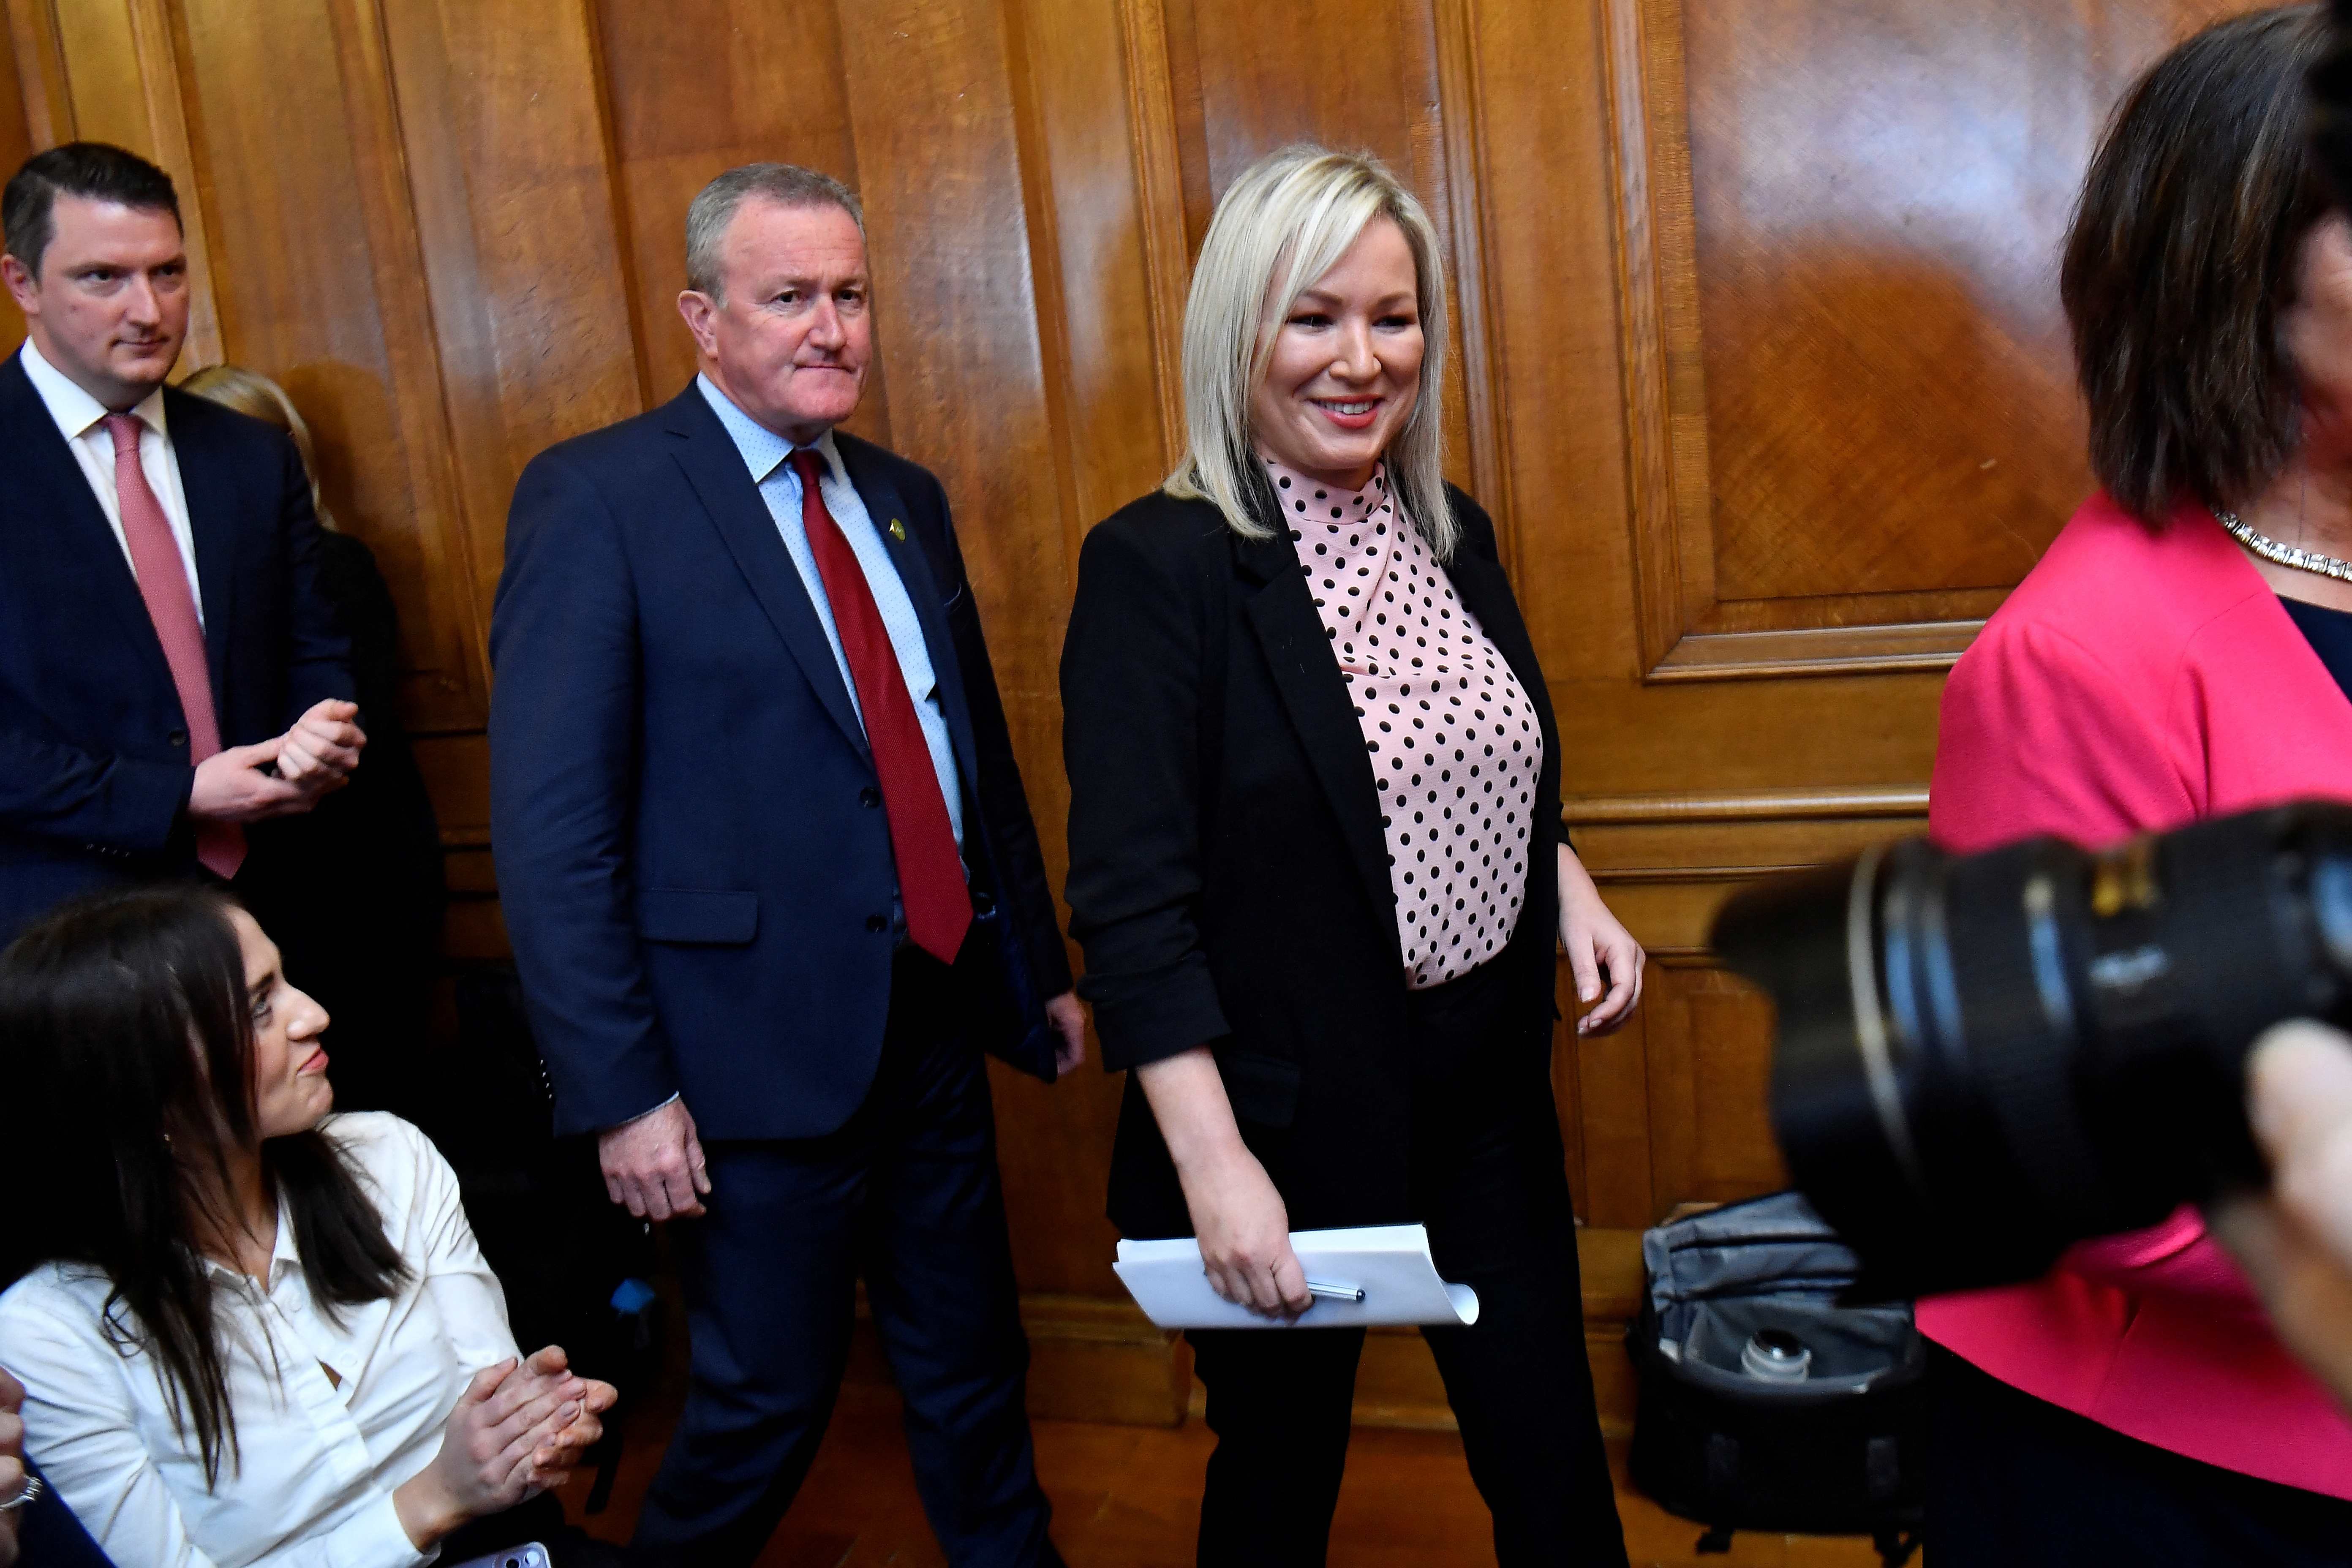 Sinn Fein leaders speak during a press conference at Stormont parliament buildings, in Belfast, Northern Ireland